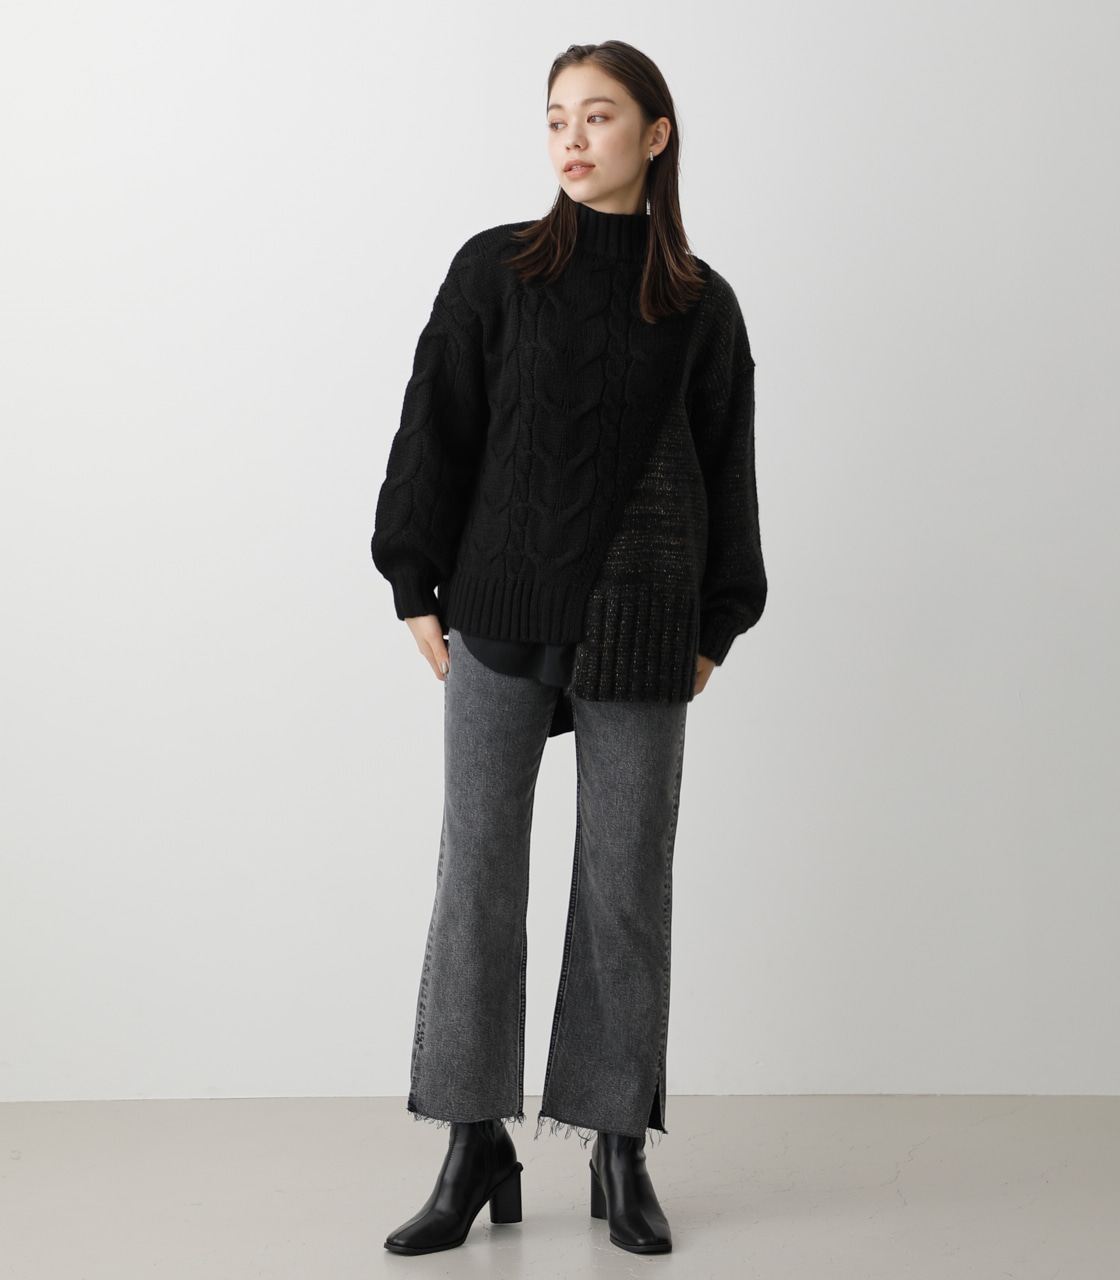 ASYMMETRY CABLE KNIT TOPS/アシンメトリーケーブルニットトップス 詳細画像 BLK 4